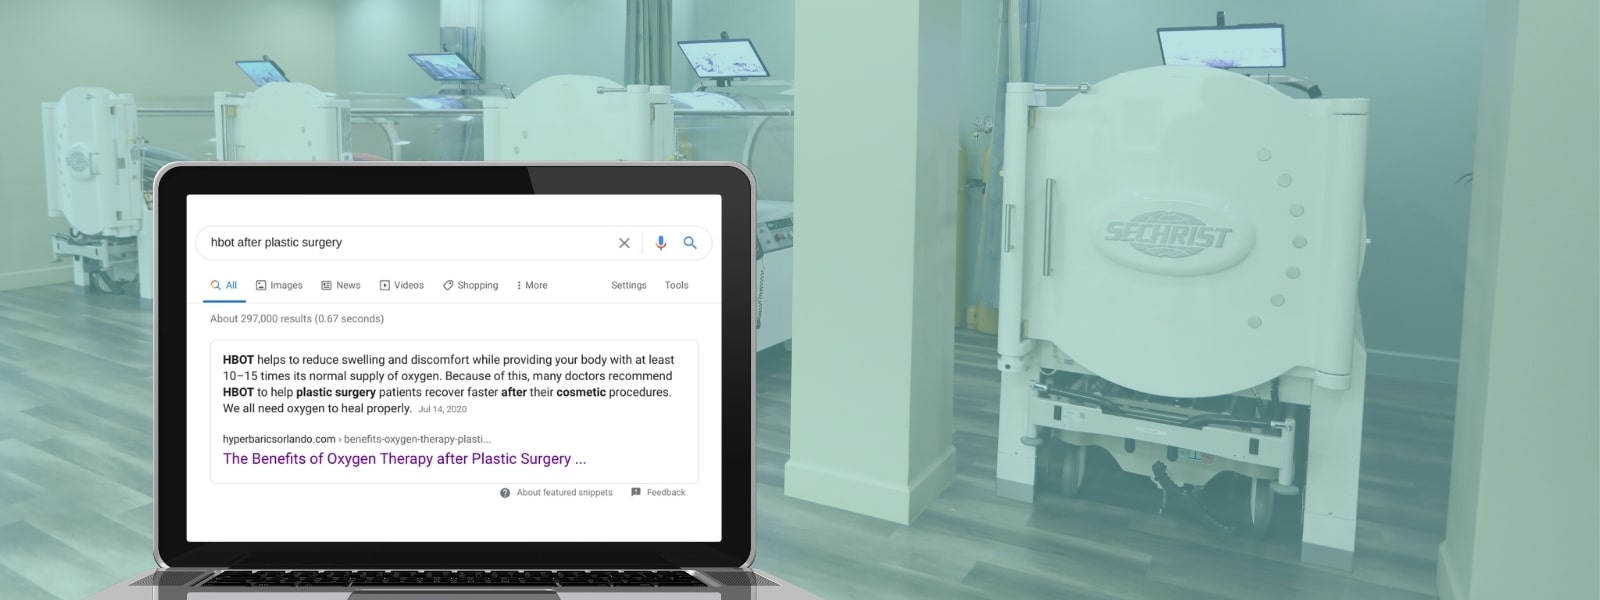 SEO Case Study: Helping Orlando’s leading hyperbaric center reach more patients